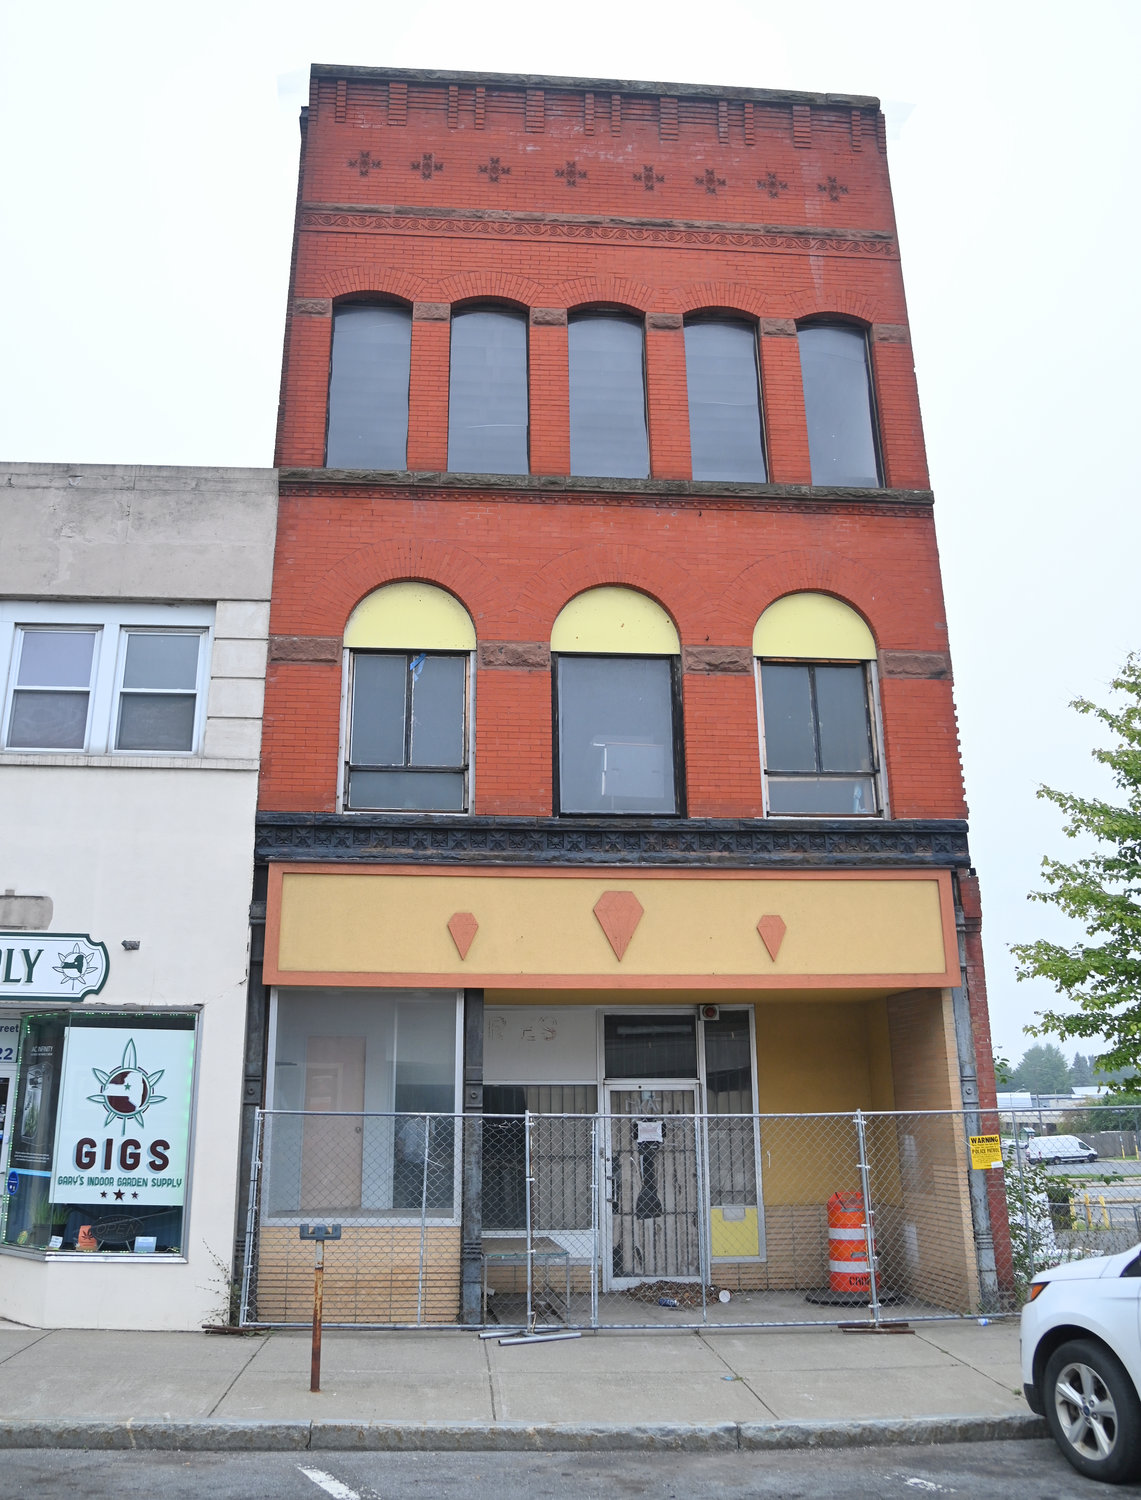 The 233 West Dominick Street building with the mural on the side is pictured on Friday.